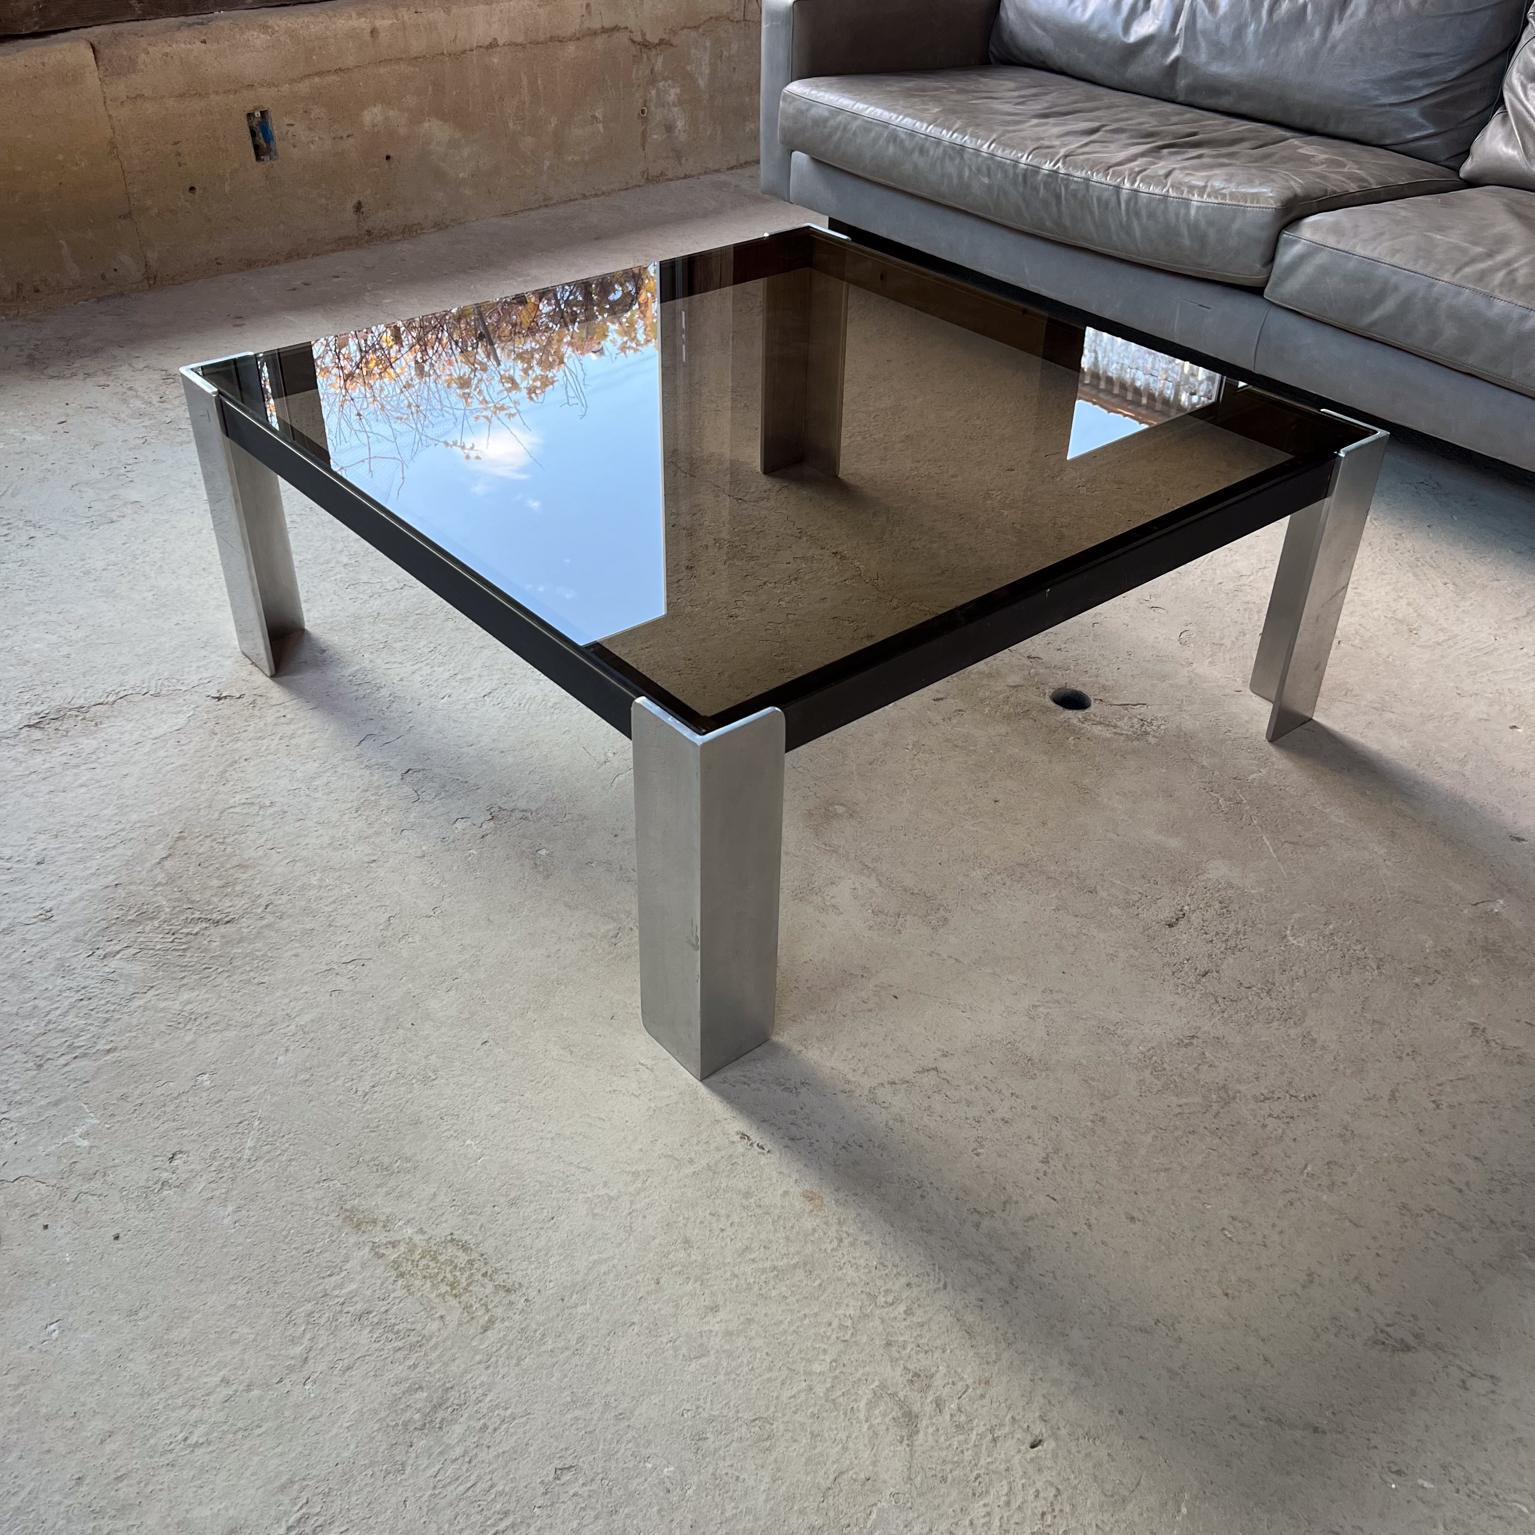 Contemporary Modern Square Coffee Table after Milo Baughman
Aluminum 
in the style of Milo Baughman
Unmarked
15.75 h x 40 x 40
Original unrestored vintage condition.
Please see images provided.
(also offering a matching console table).